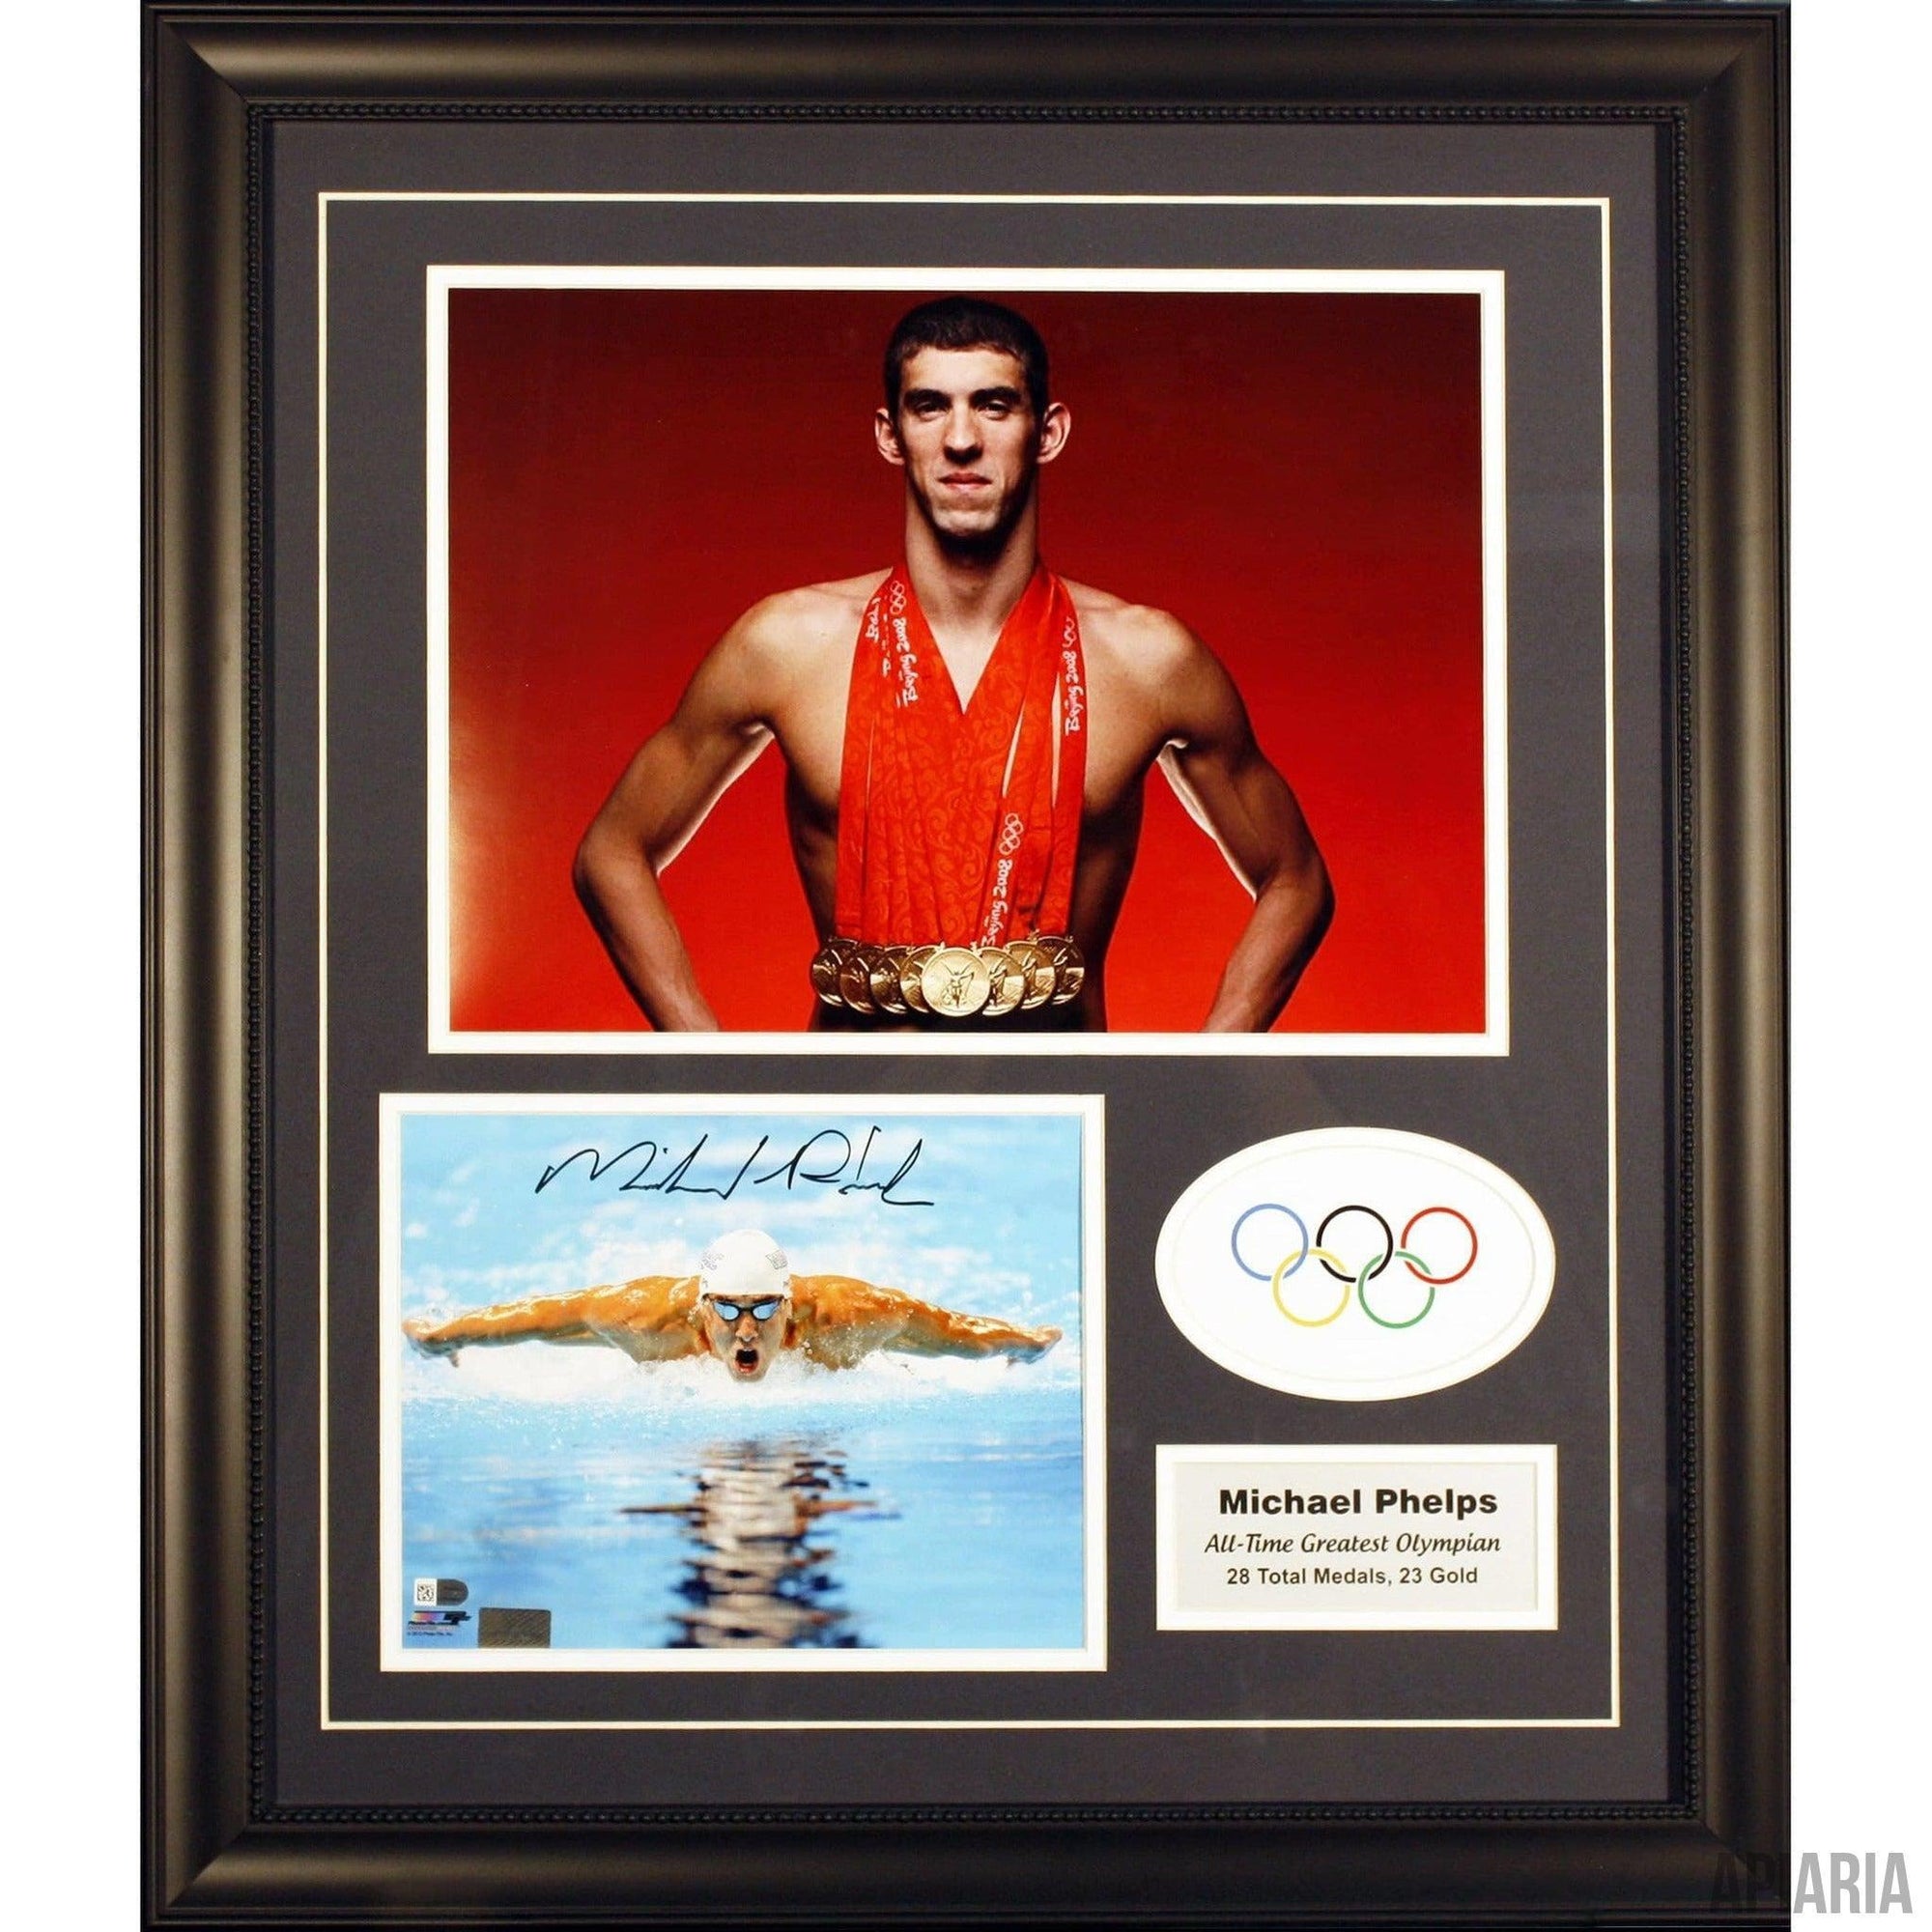 Michael Phelps Autographed Photo-Framed Item-Apiaria